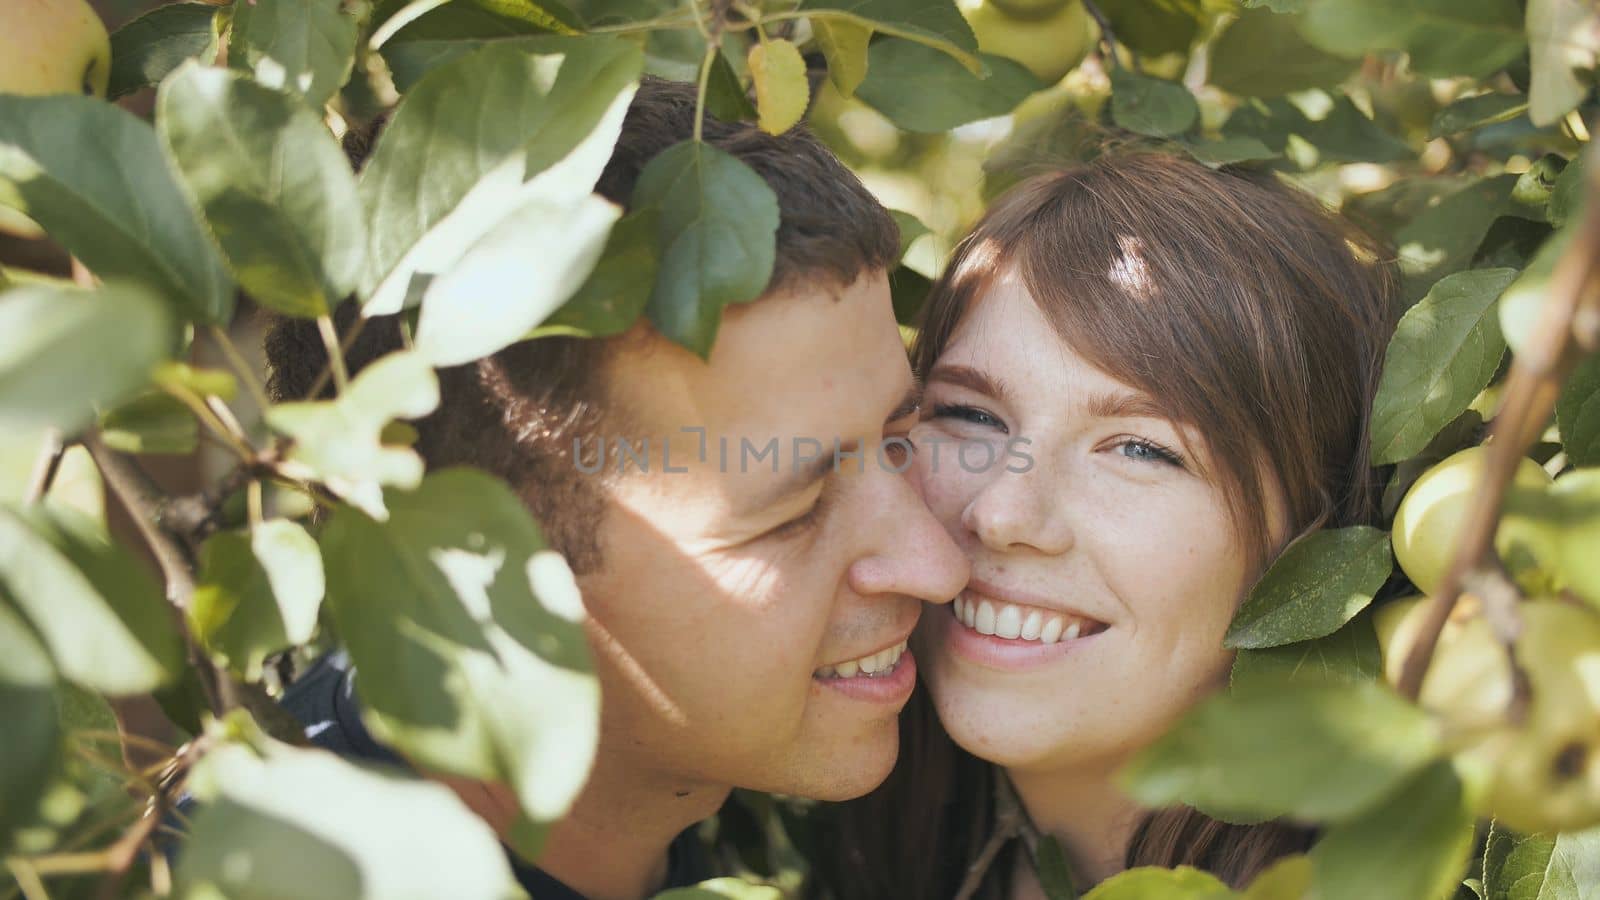 A boy and a girl in love in the branches of an apple tree hugging each other